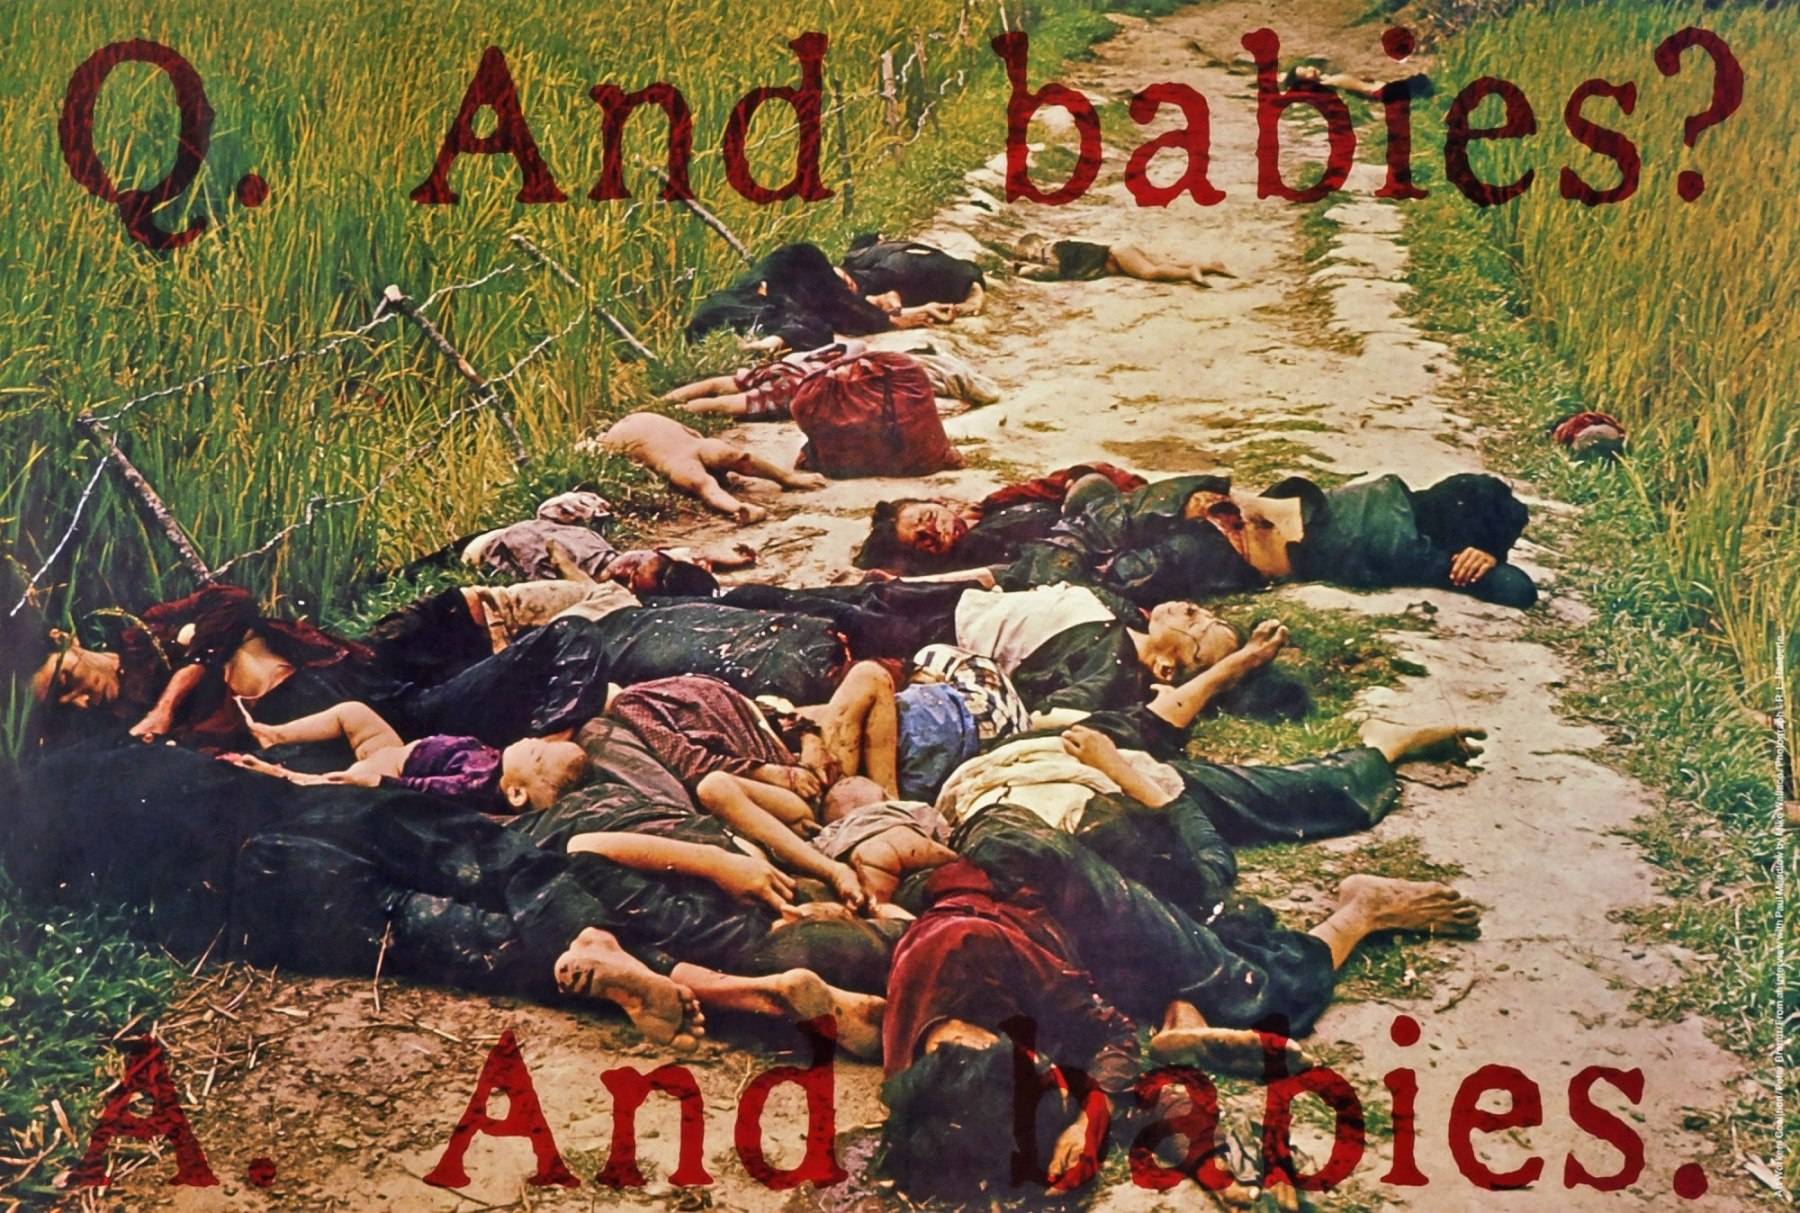 Art Workers&rsquo; Coalition, &ldquo;Q. And babies? A. And babies.,&rdquo; 1970, offset lithograph on paper. The Coalition reproduced an Army photograph of slaughtered Vietnamese women and children in a ditch at My Lai, distributed it fast and free &mdash; and never claimed that it was art.